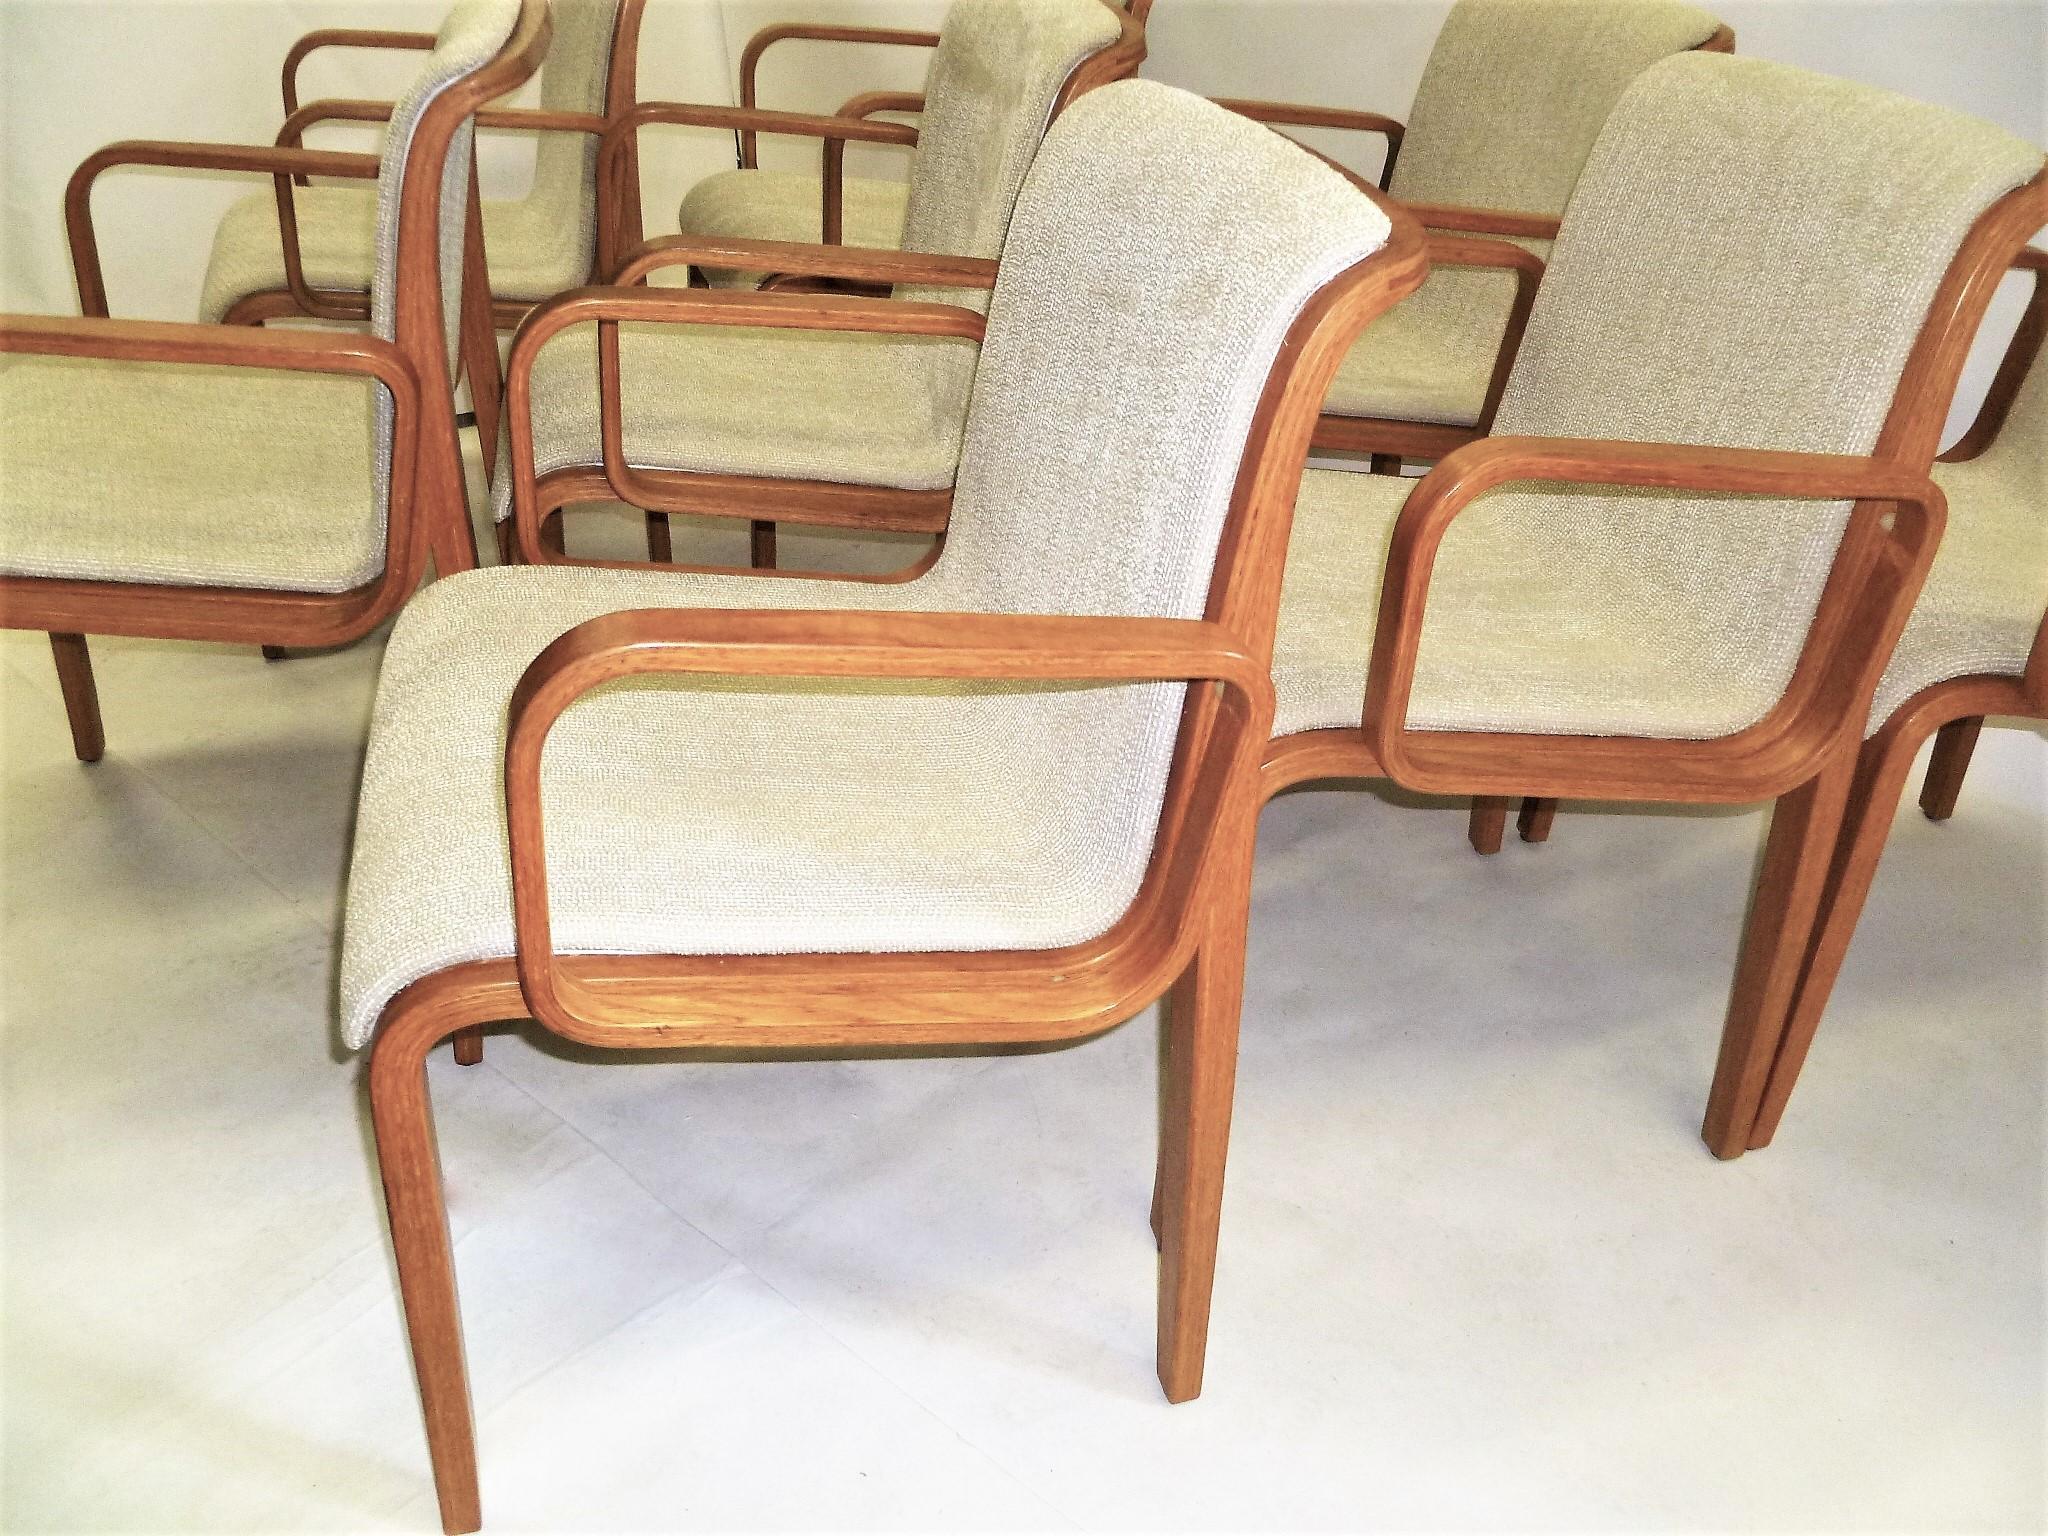 American 8 Bill Stephens Midcentury 1300 Series Armed Dining Chairs for Knoll